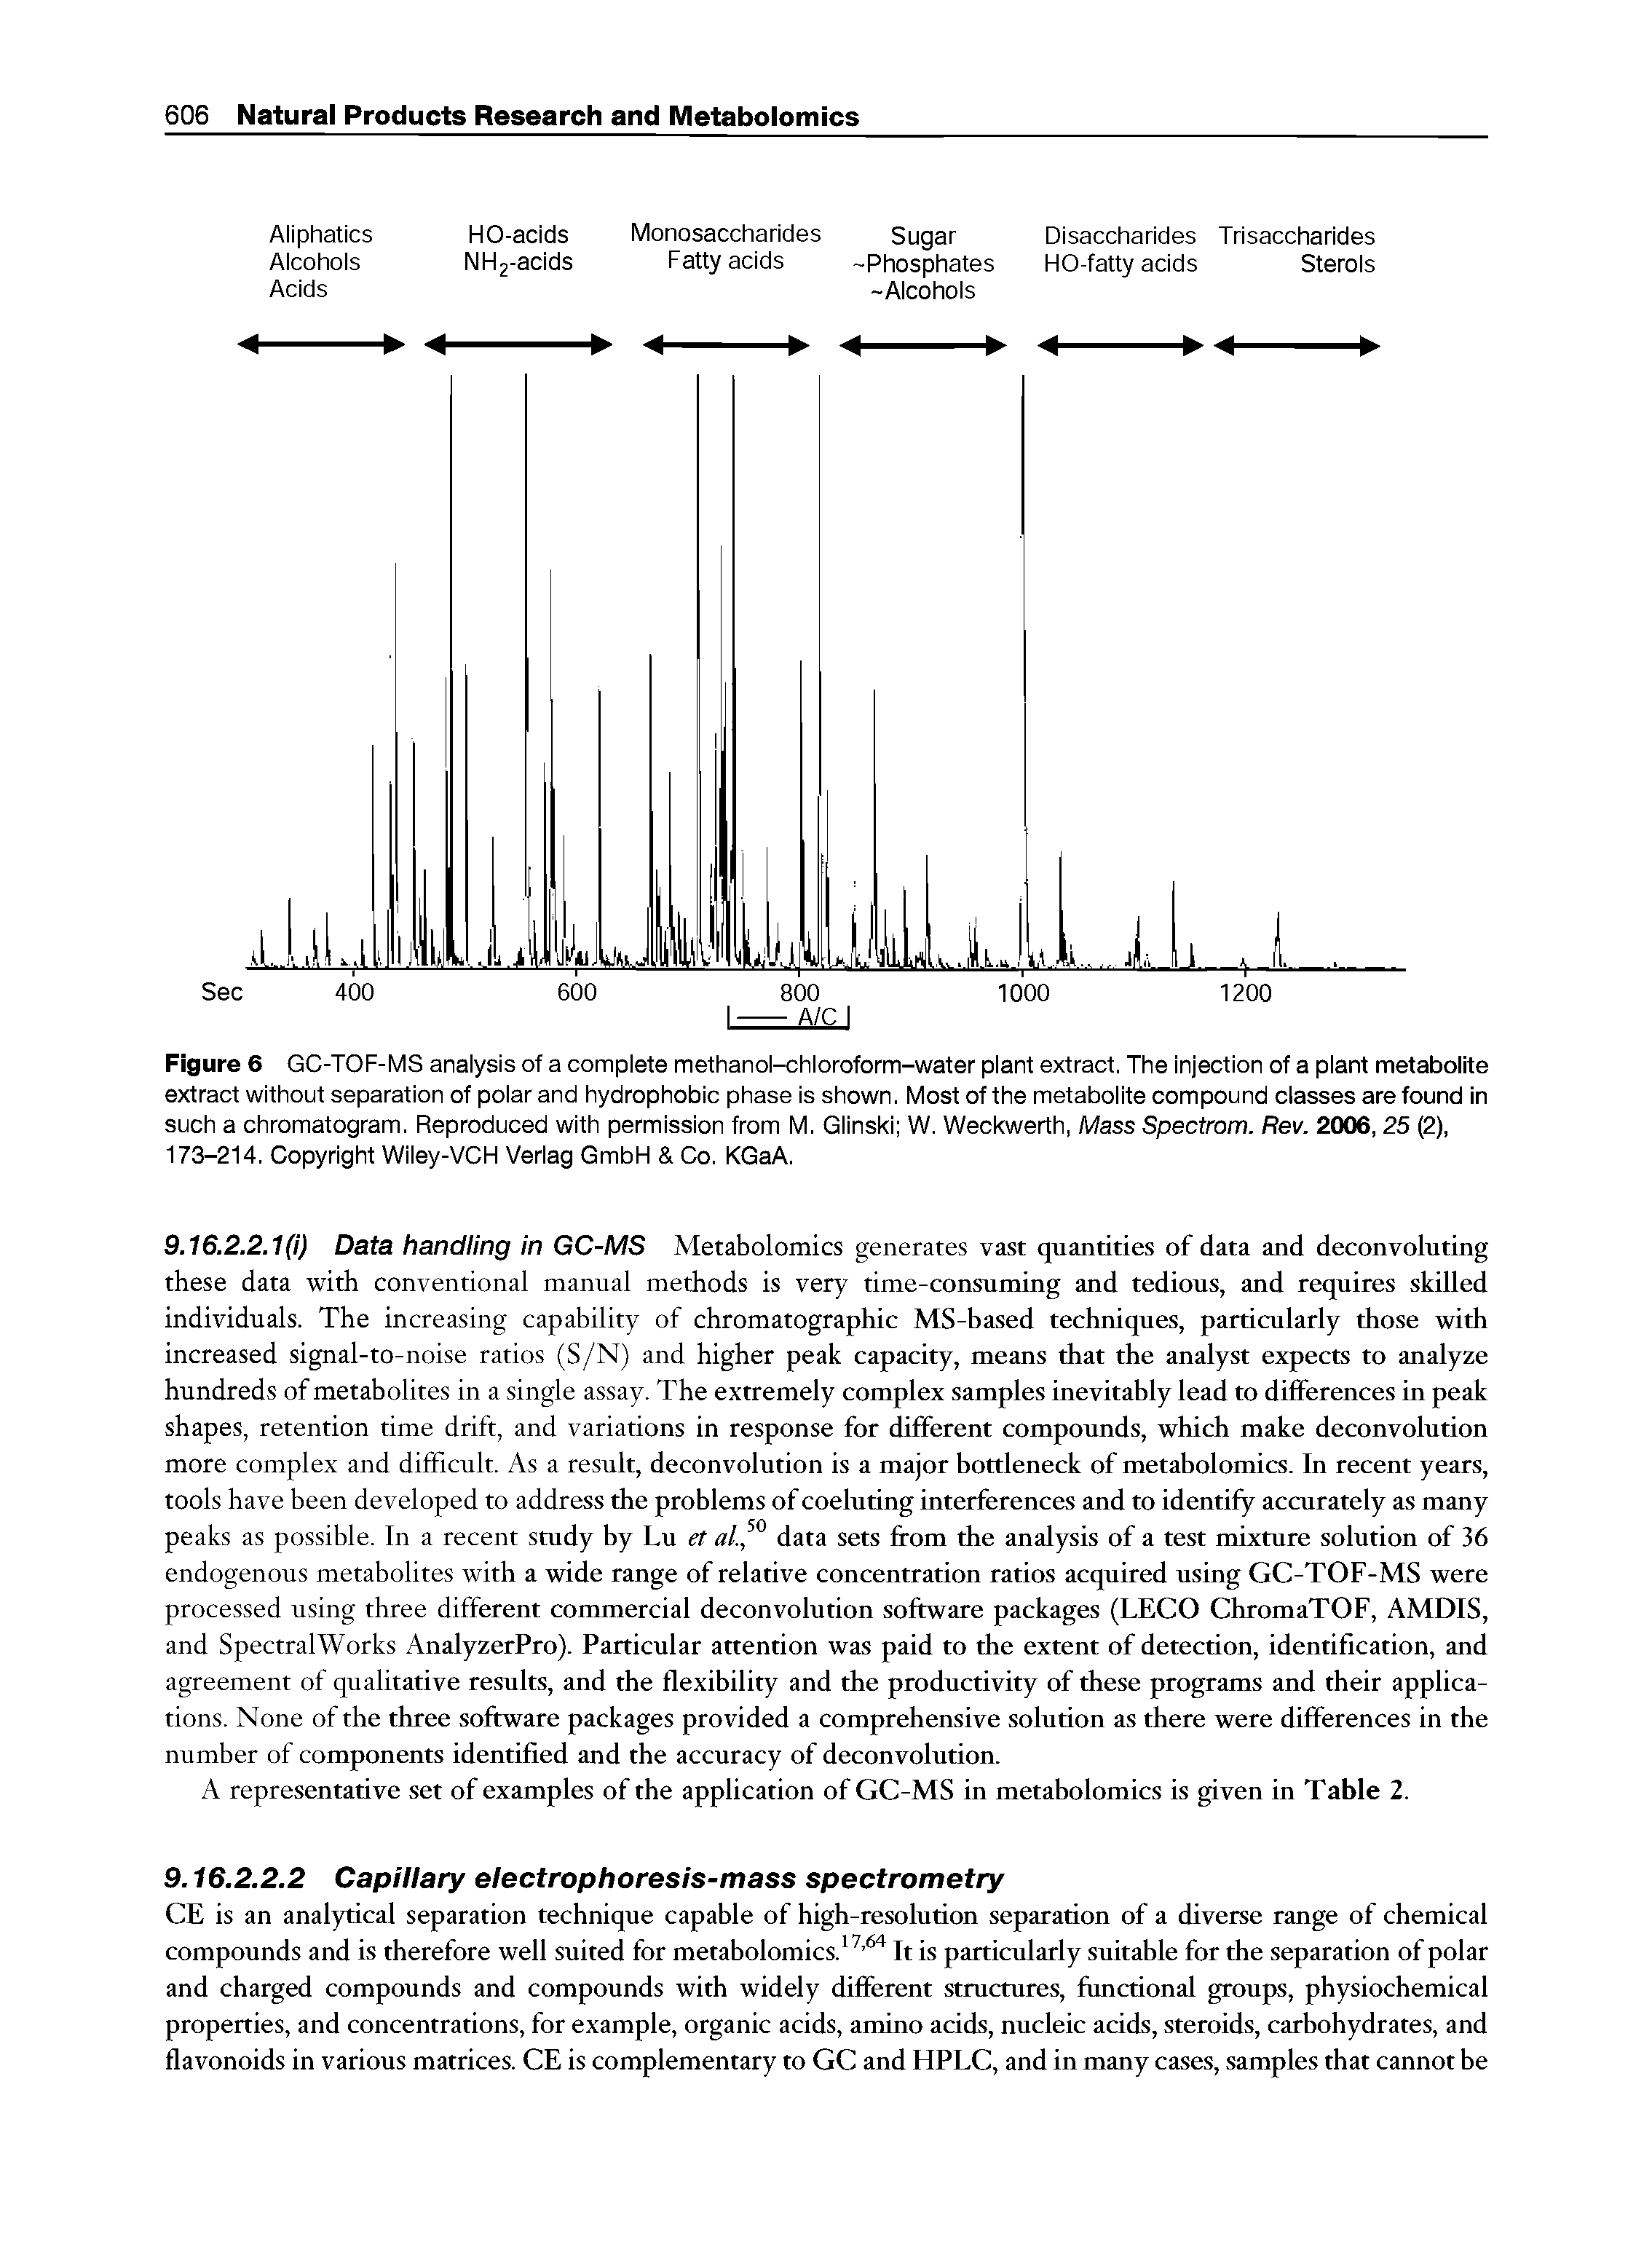 Figure 6 GC-TOF-MS analysis of a complete methanol-chloroform-water plant extract. The injection of a plant metabolite extract without separation of polar and hydrophobic phase is shown. Most of the metabolite compound classes are found in such a chromatogram. Reproduced with permission from M. Glinski W. Weckwerth, Mass Spectrom. Rev. 2006,25 (2), 173-214. Copyright Wiley-VCFI Verlag GmbFI Co. KGaA.